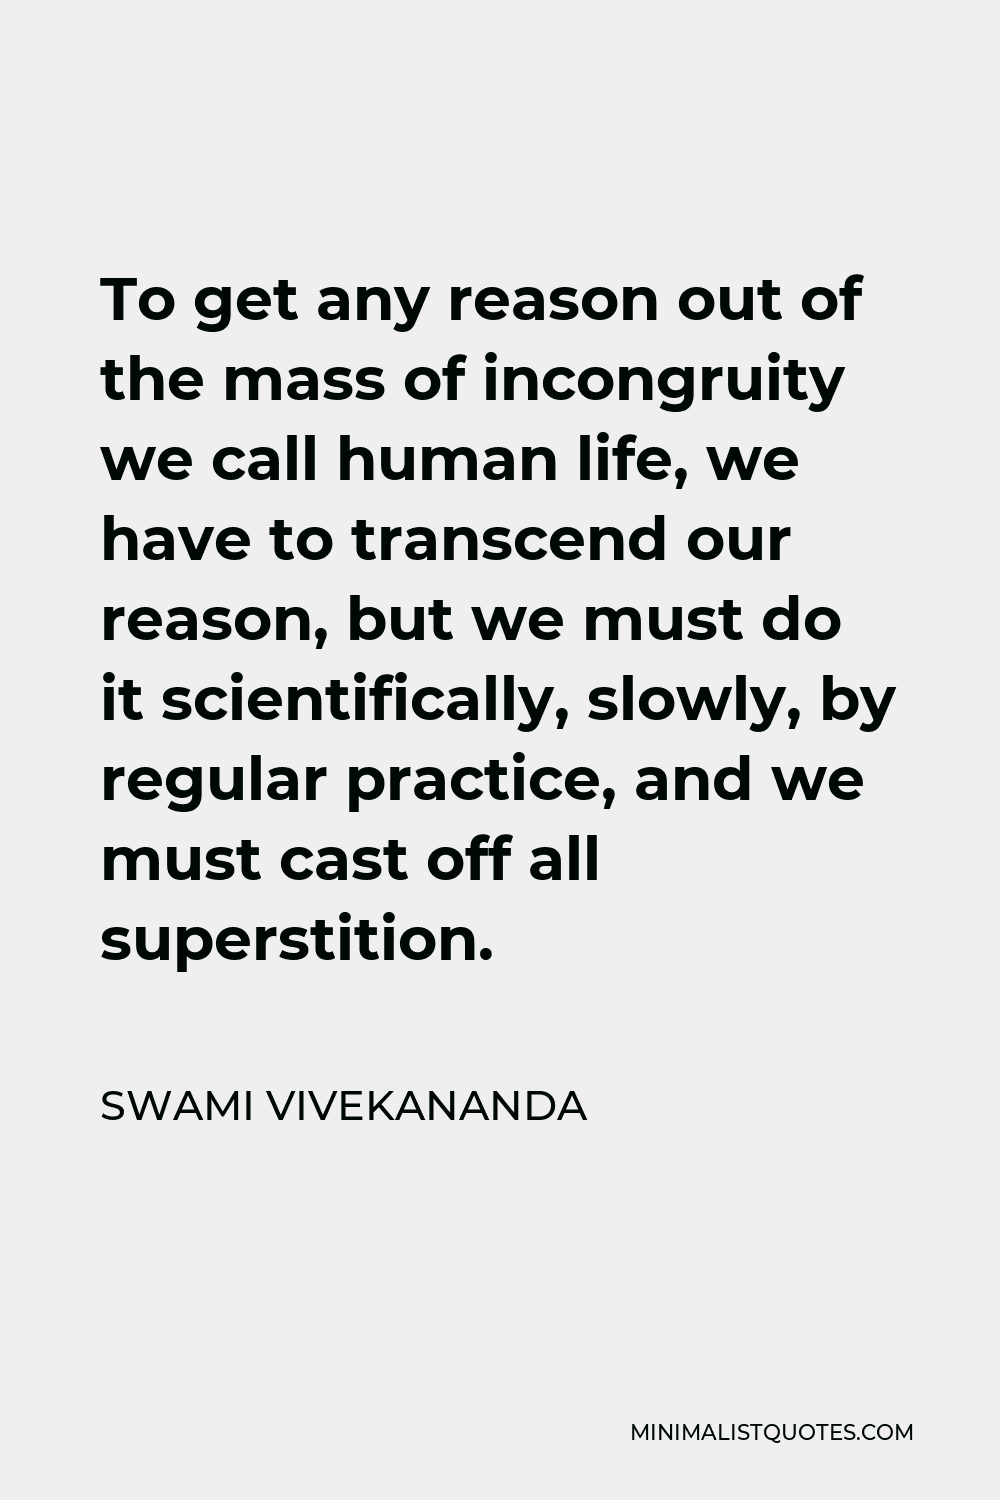 Swami Vivekananda Quote - To get any reason out of the mass of incongruity we call human life, we have to transcend our reason, but we must do it scientifically, slowly, by regular practice, and we must cast off all superstition.